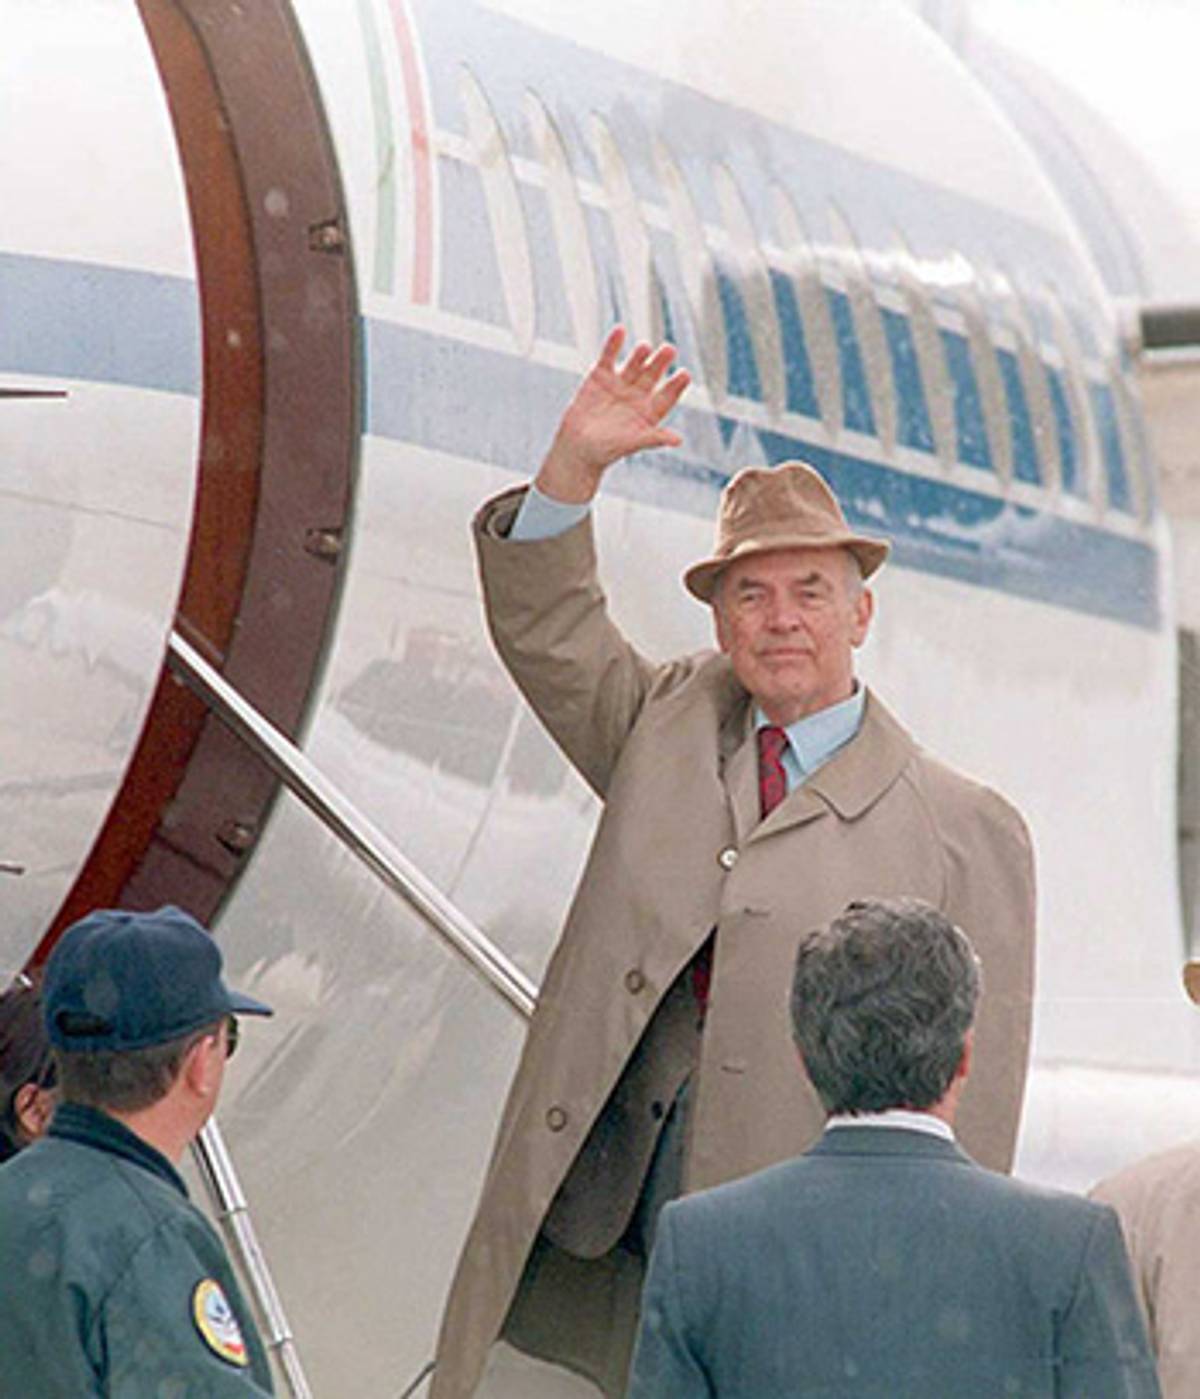 Priebke waves goodbye as he is extradited to Italy on Nov. 20, 1995, at the Bariloche Airport. (Daniel Luna/AFP/Getty Images)